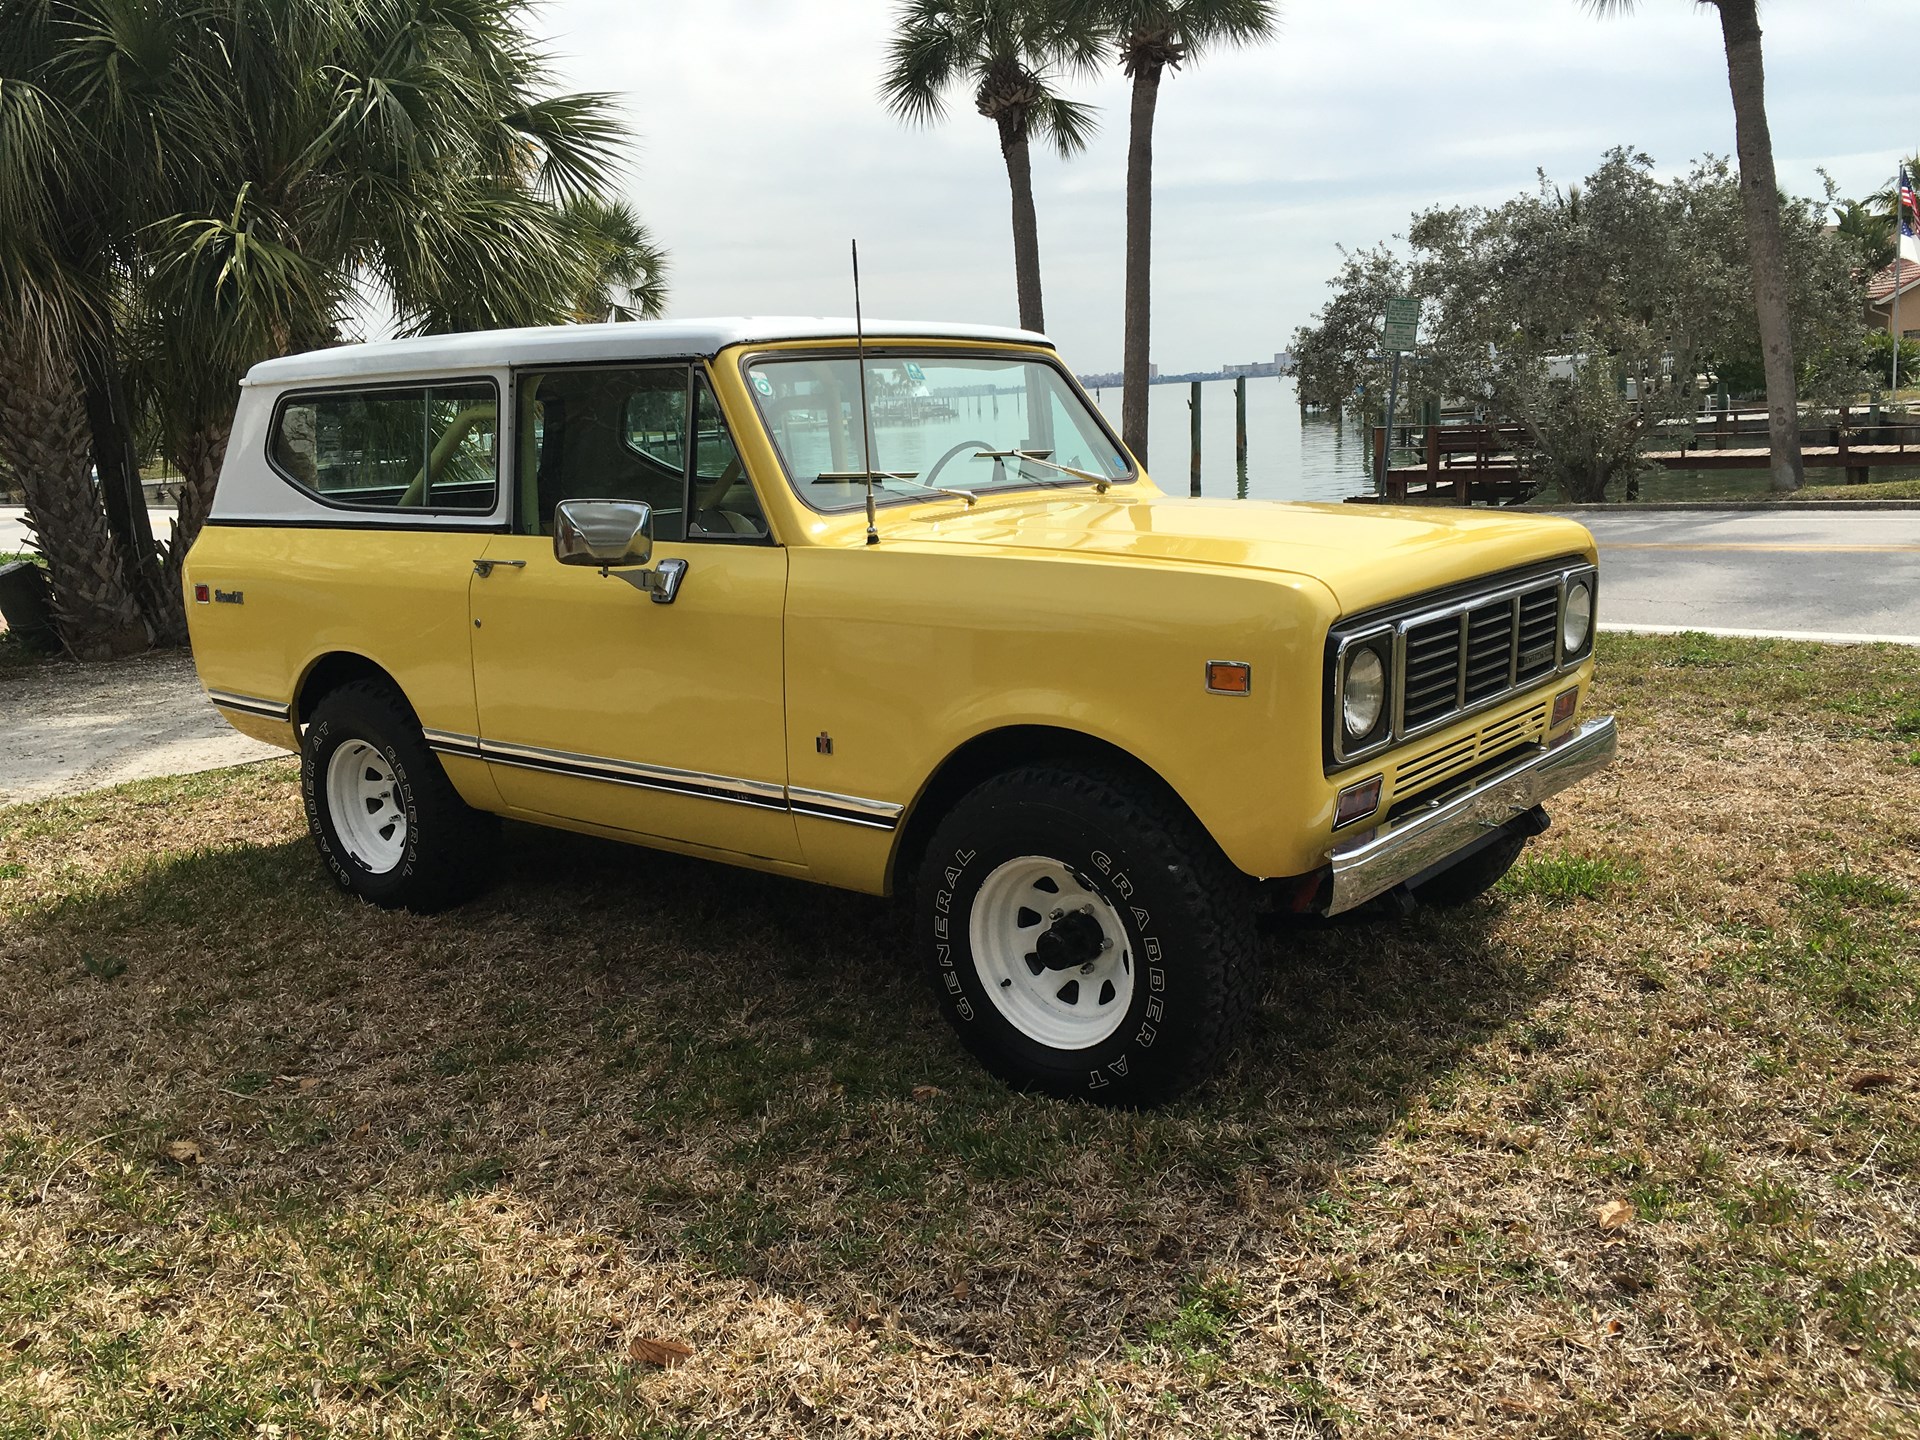 1976 International Scout II | Fort Lauderdale 2016 | RM Auctions